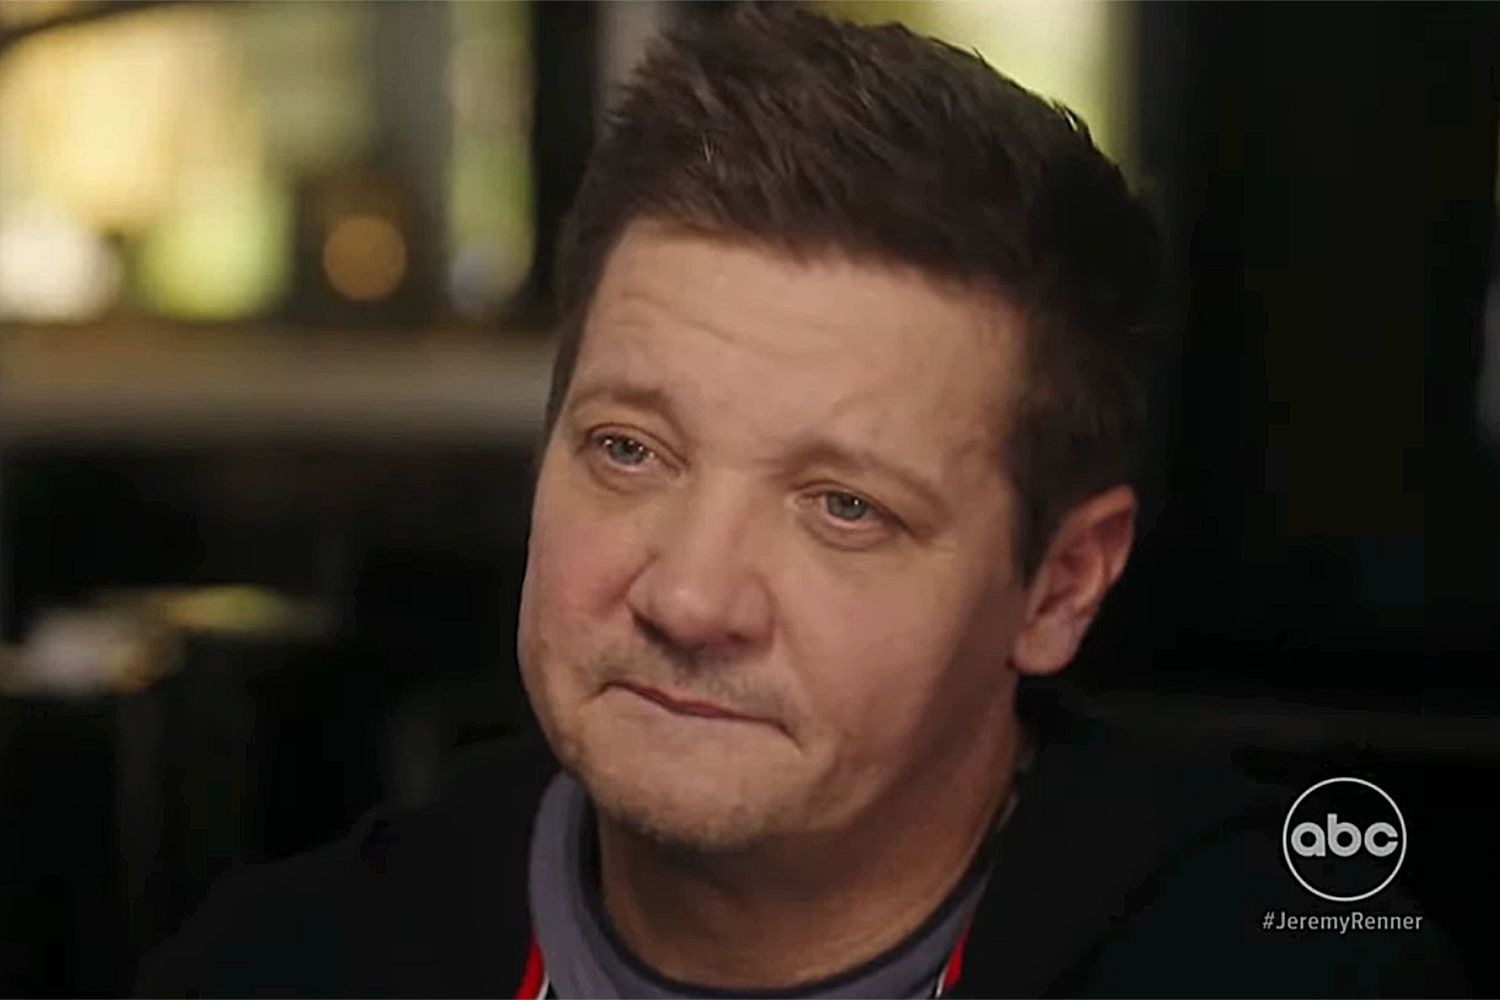 Jeremy Renner Shares What Last Words to Family Would’ve Been in Note: ‘Don’t Let Me Live on Tubes’